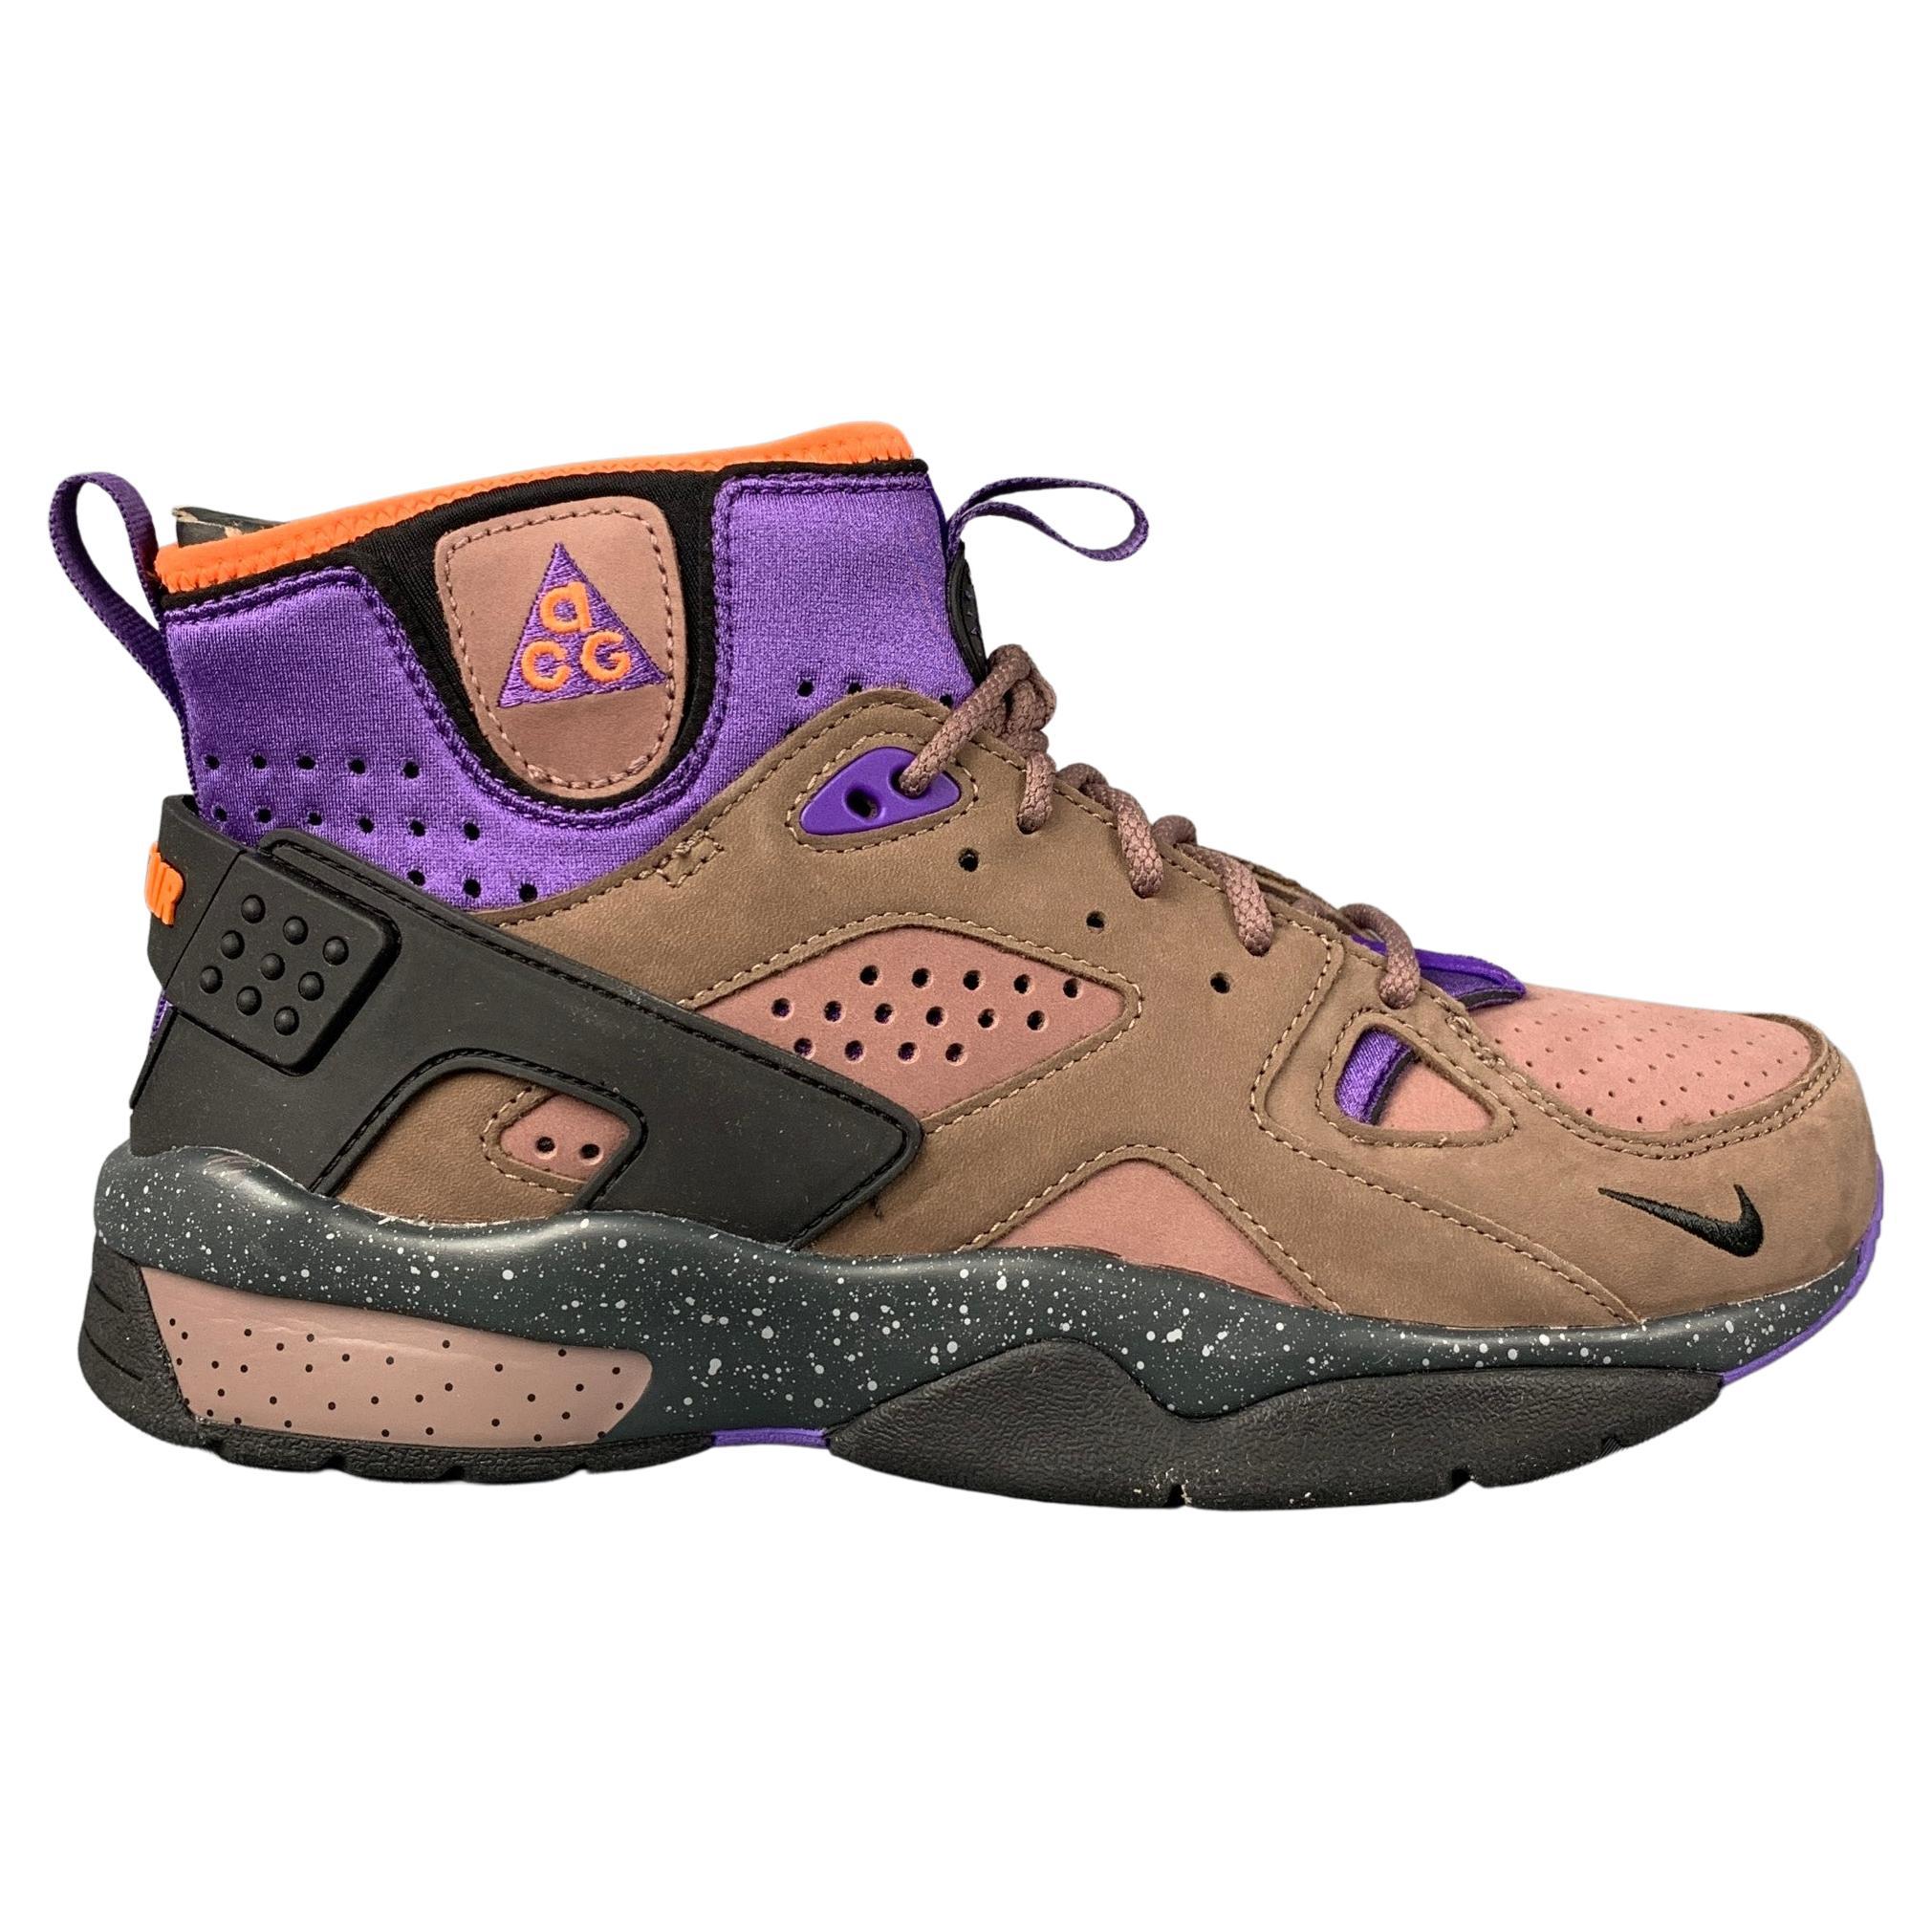 NIKE ACG AIR MOWABB Size 9.5 Brown Purple High Top Sneakers For Sale at  1stDibs